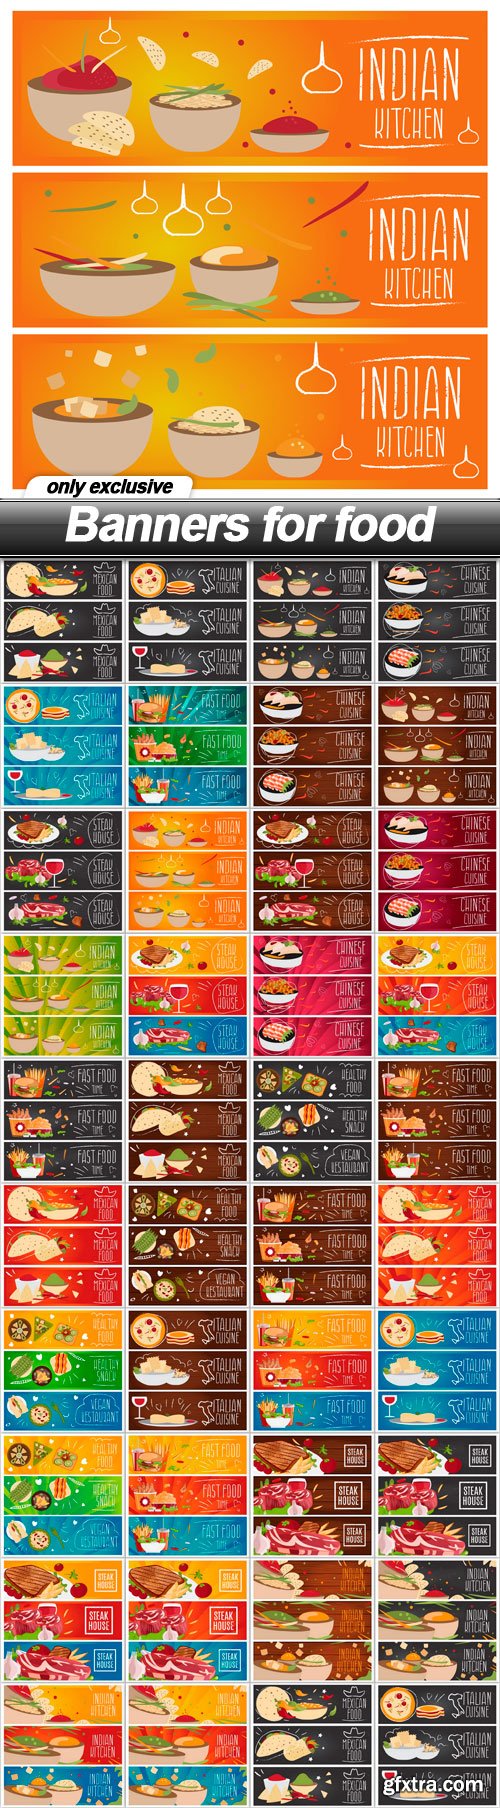 Banners for food - 38 EPS